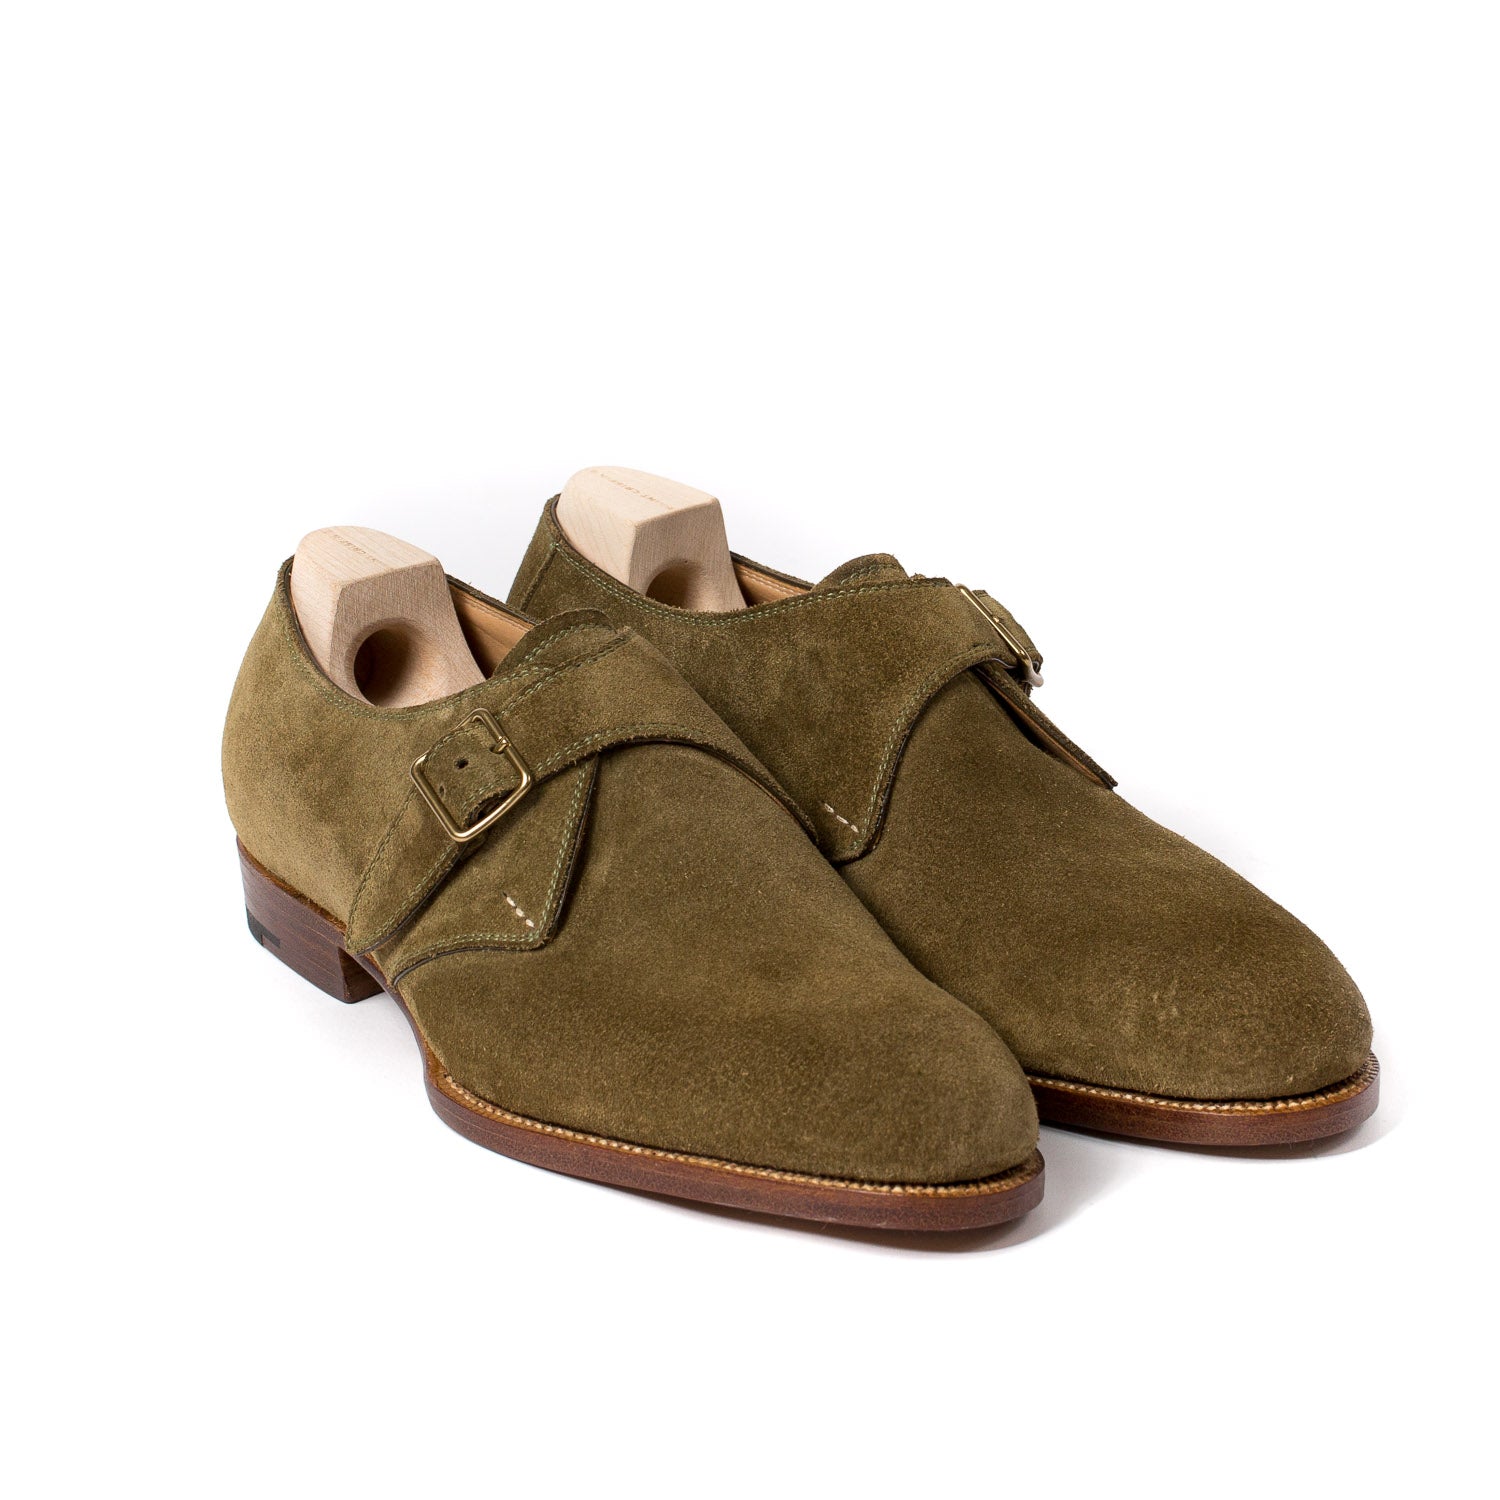 Monk "Classic" made of olive green suede   purely handcrafted